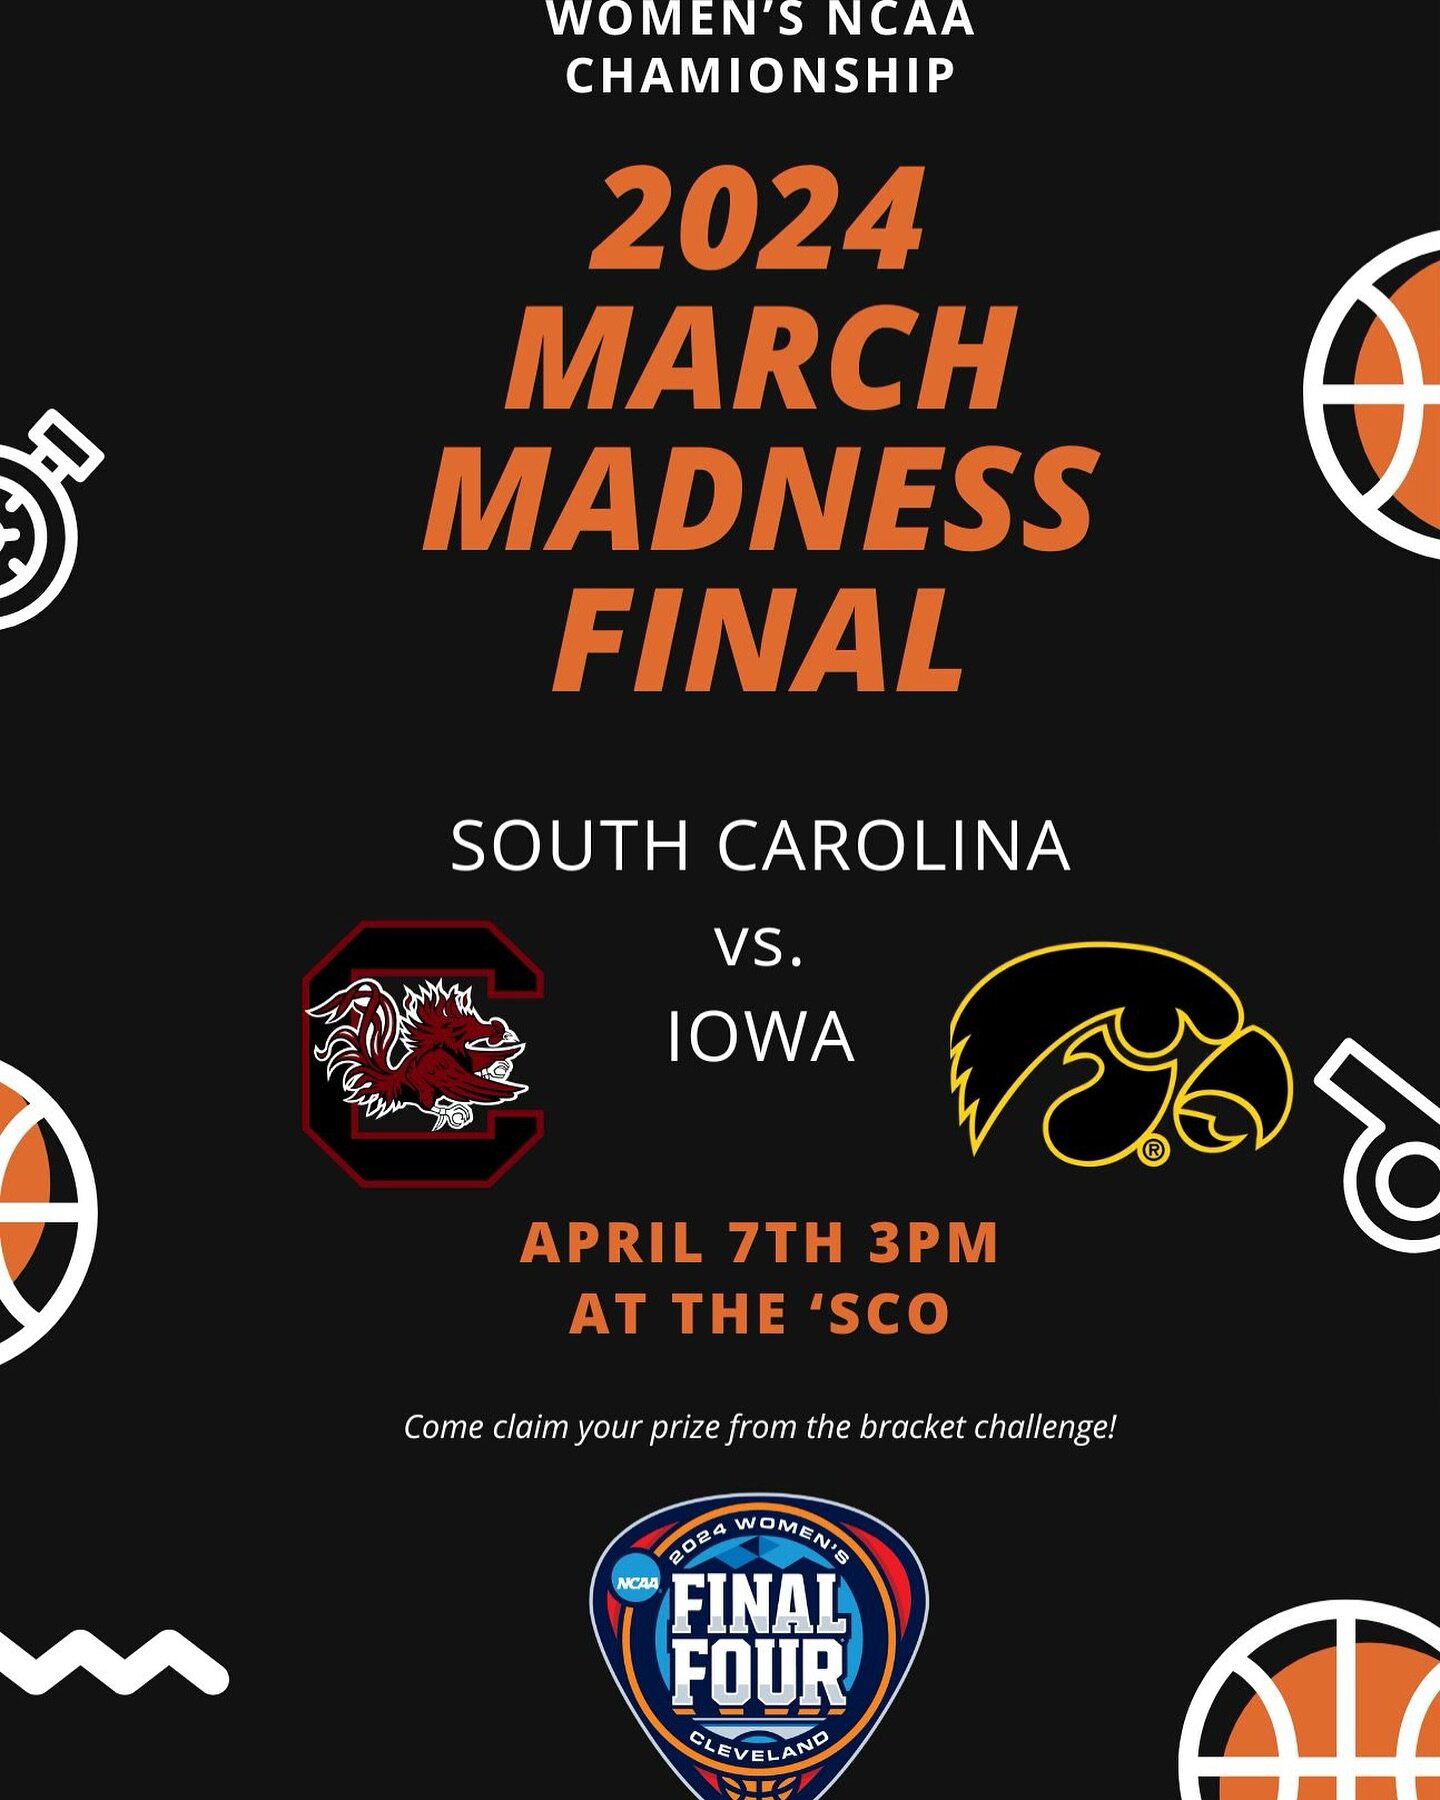 Bring your friends to watch the Women&rsquo;s Basketball NCAA Championship this afternoon hosted at the Sco! Game starts at 3pm!!